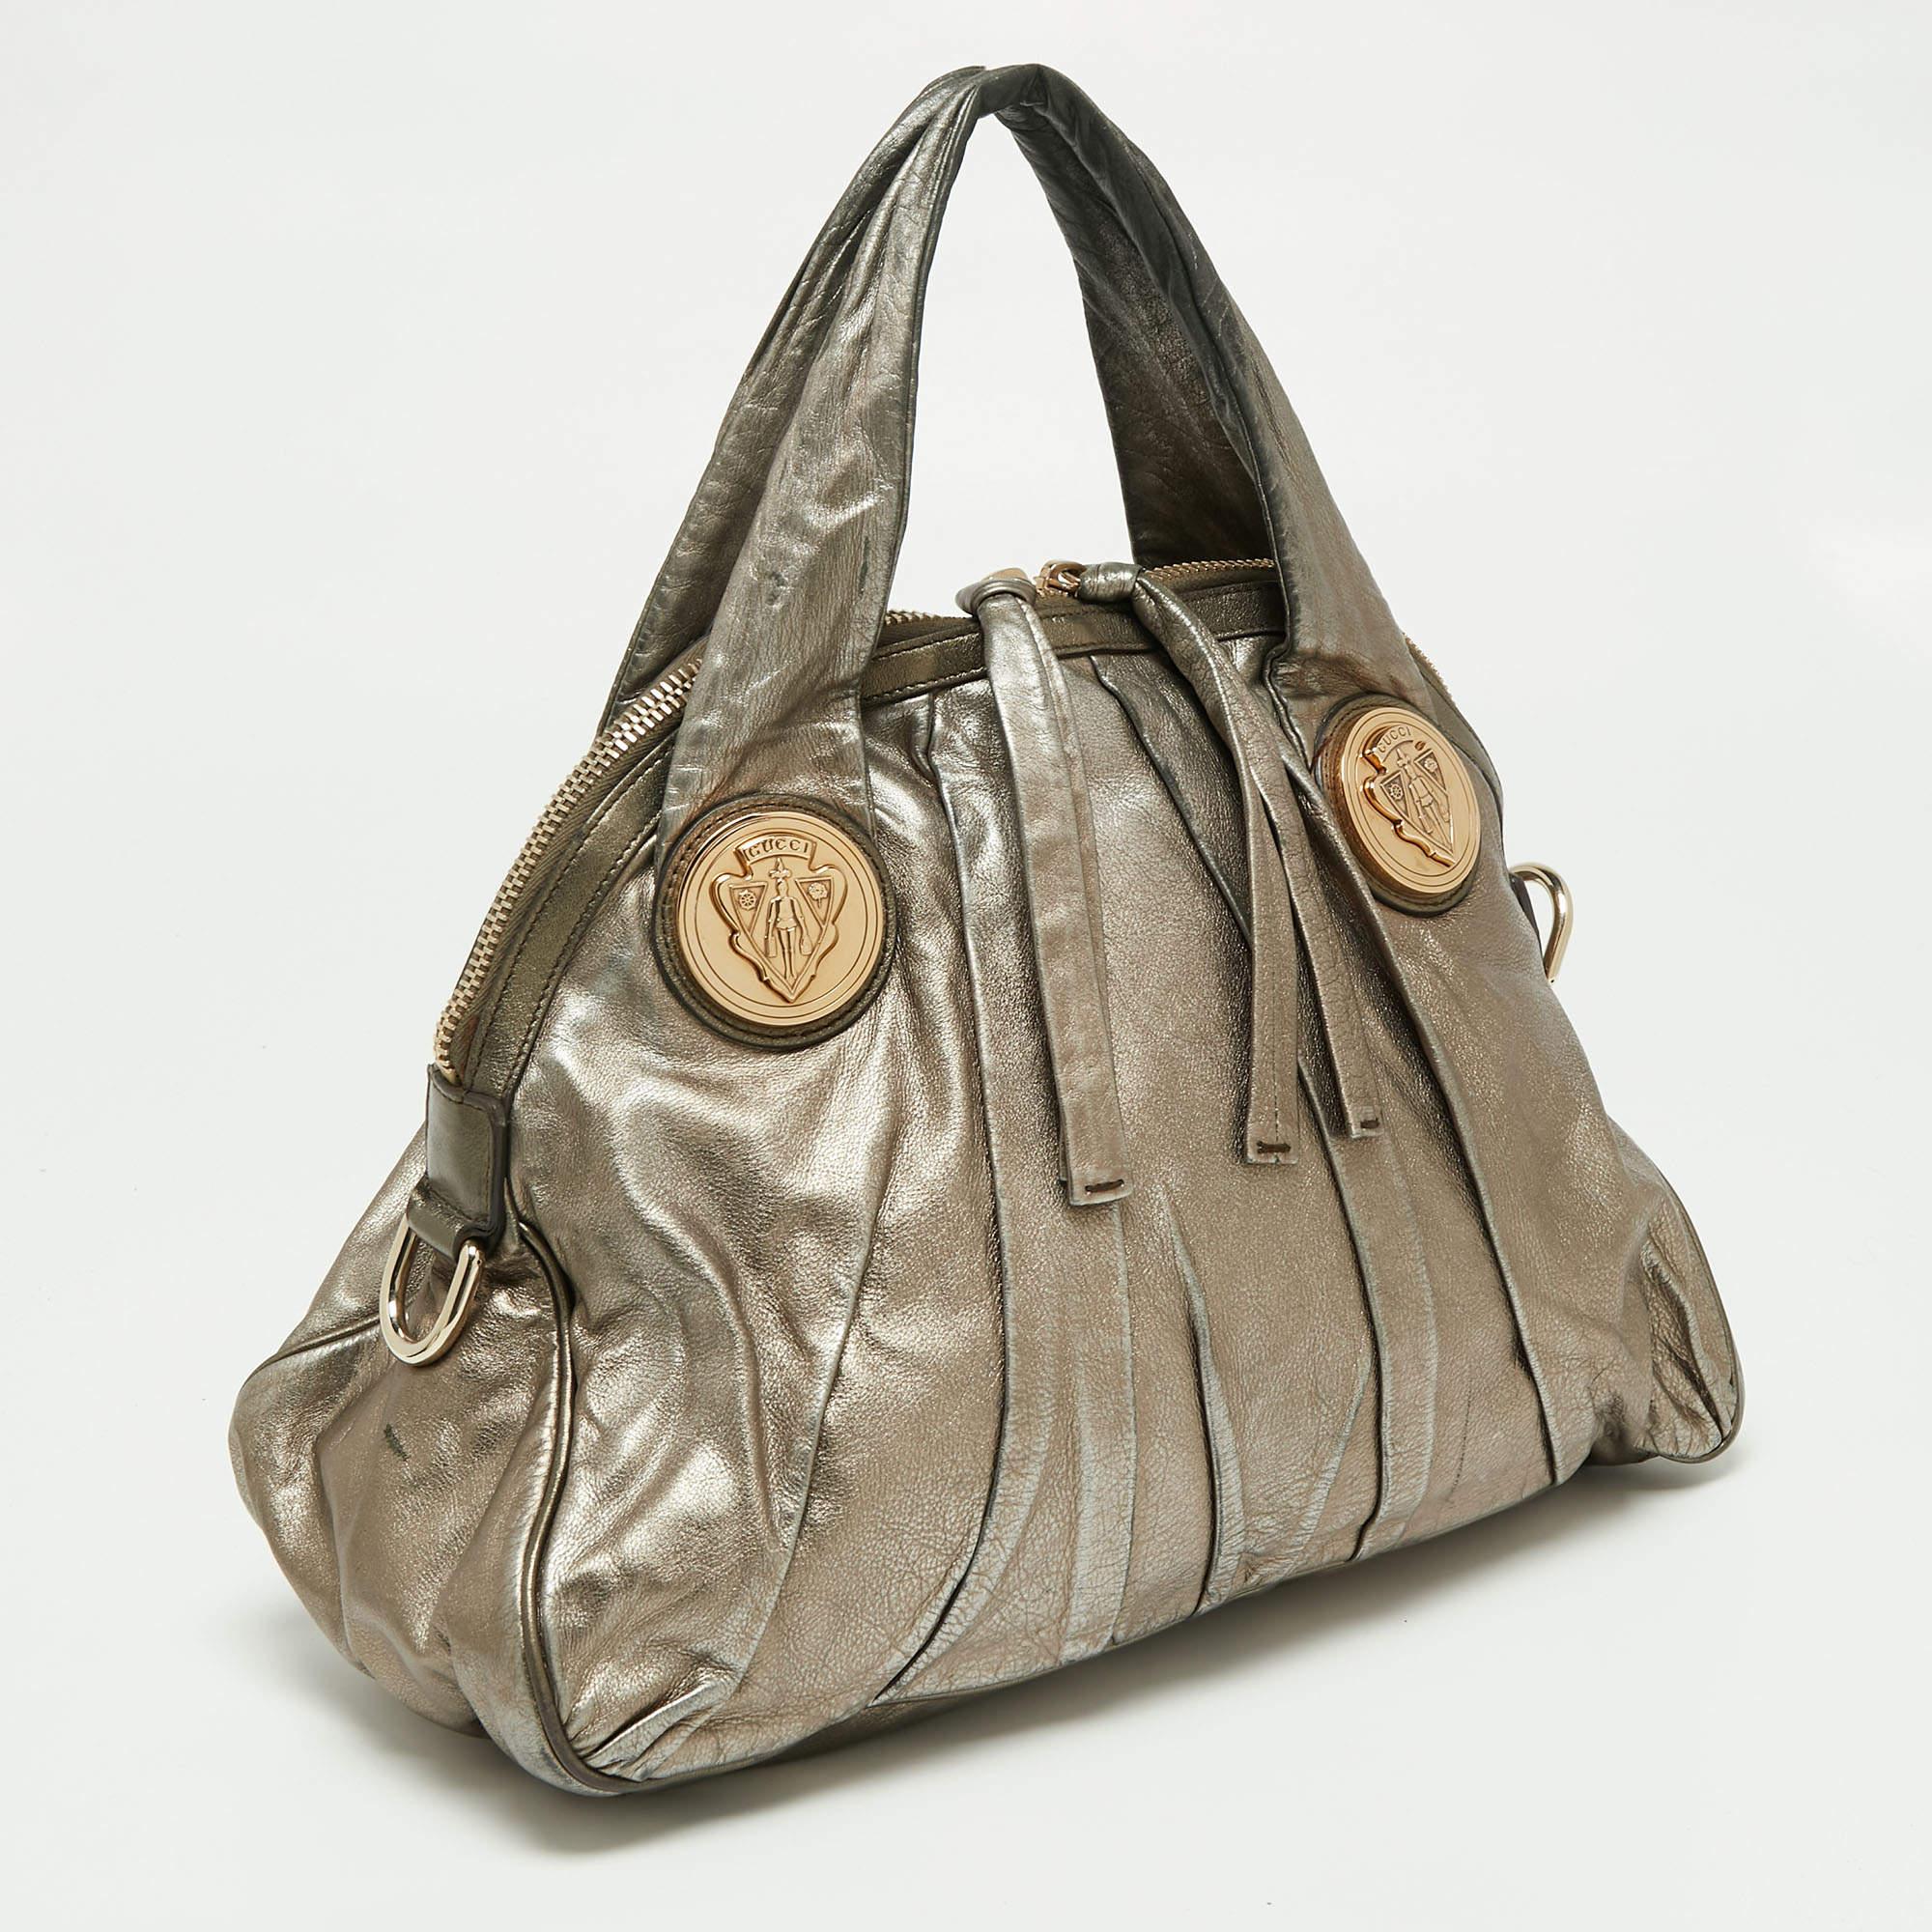 This Gucci hobo is built for everyday use. Crafted from metallic gold leather, it has a grand-looking exterior and is fitted with two top handles. The interior is sized spaciously and the hobo is complete with the signature emblems.

